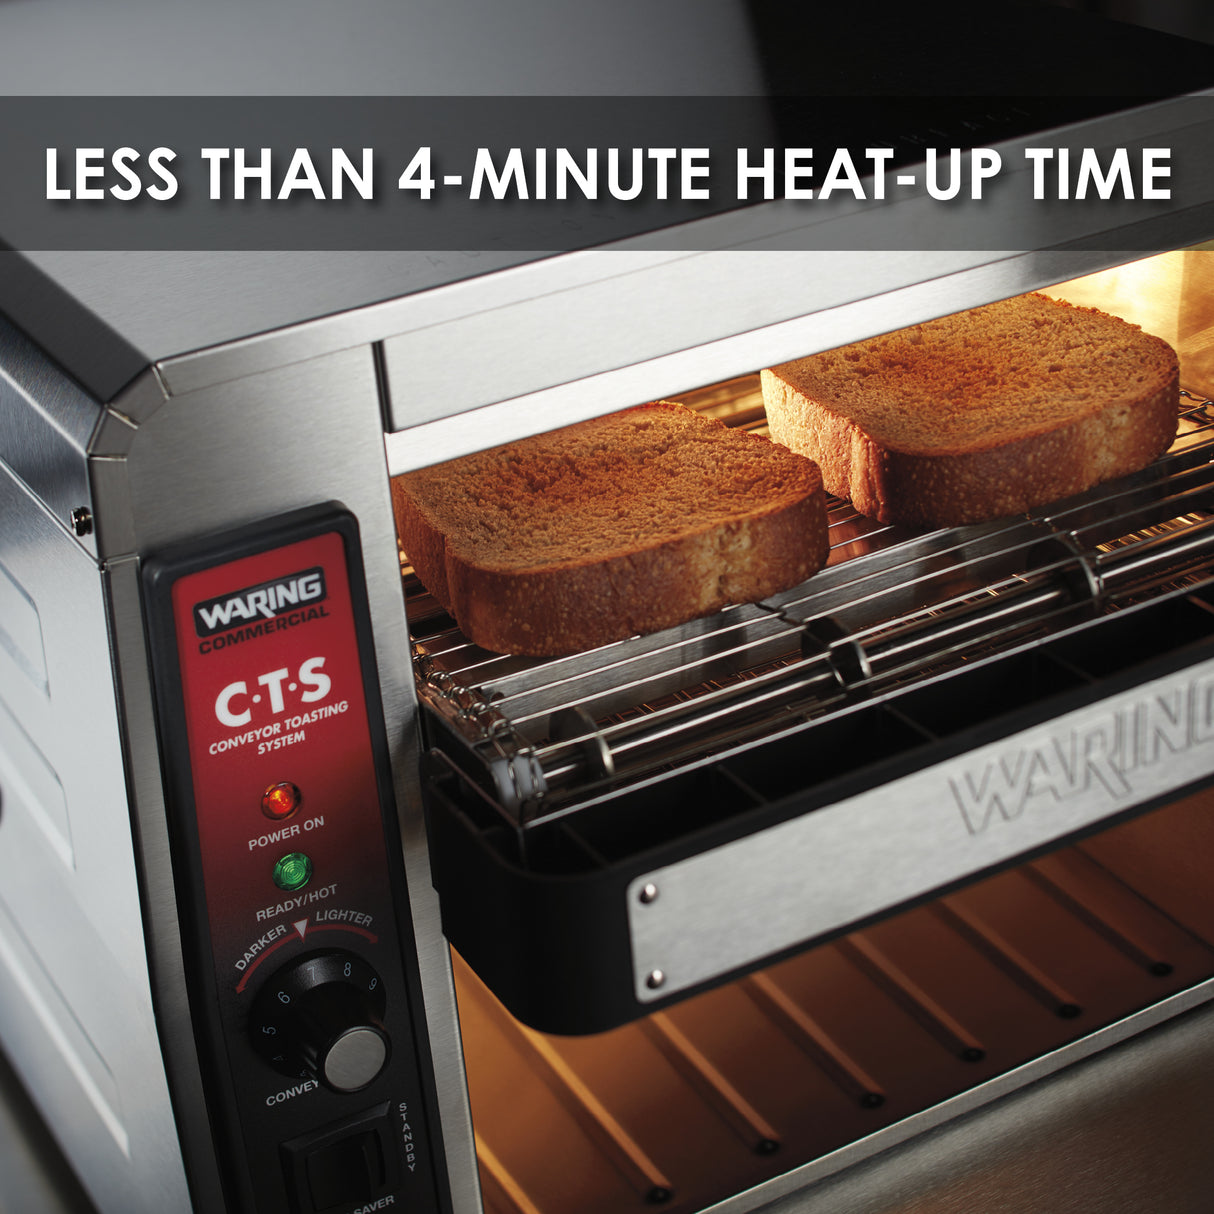 Waring HEAVY-DUTY CONVEYOR TOASTER 208V WITH POWER CONTROL AND BELT SPEED CONTROL  Model: CTS1000B